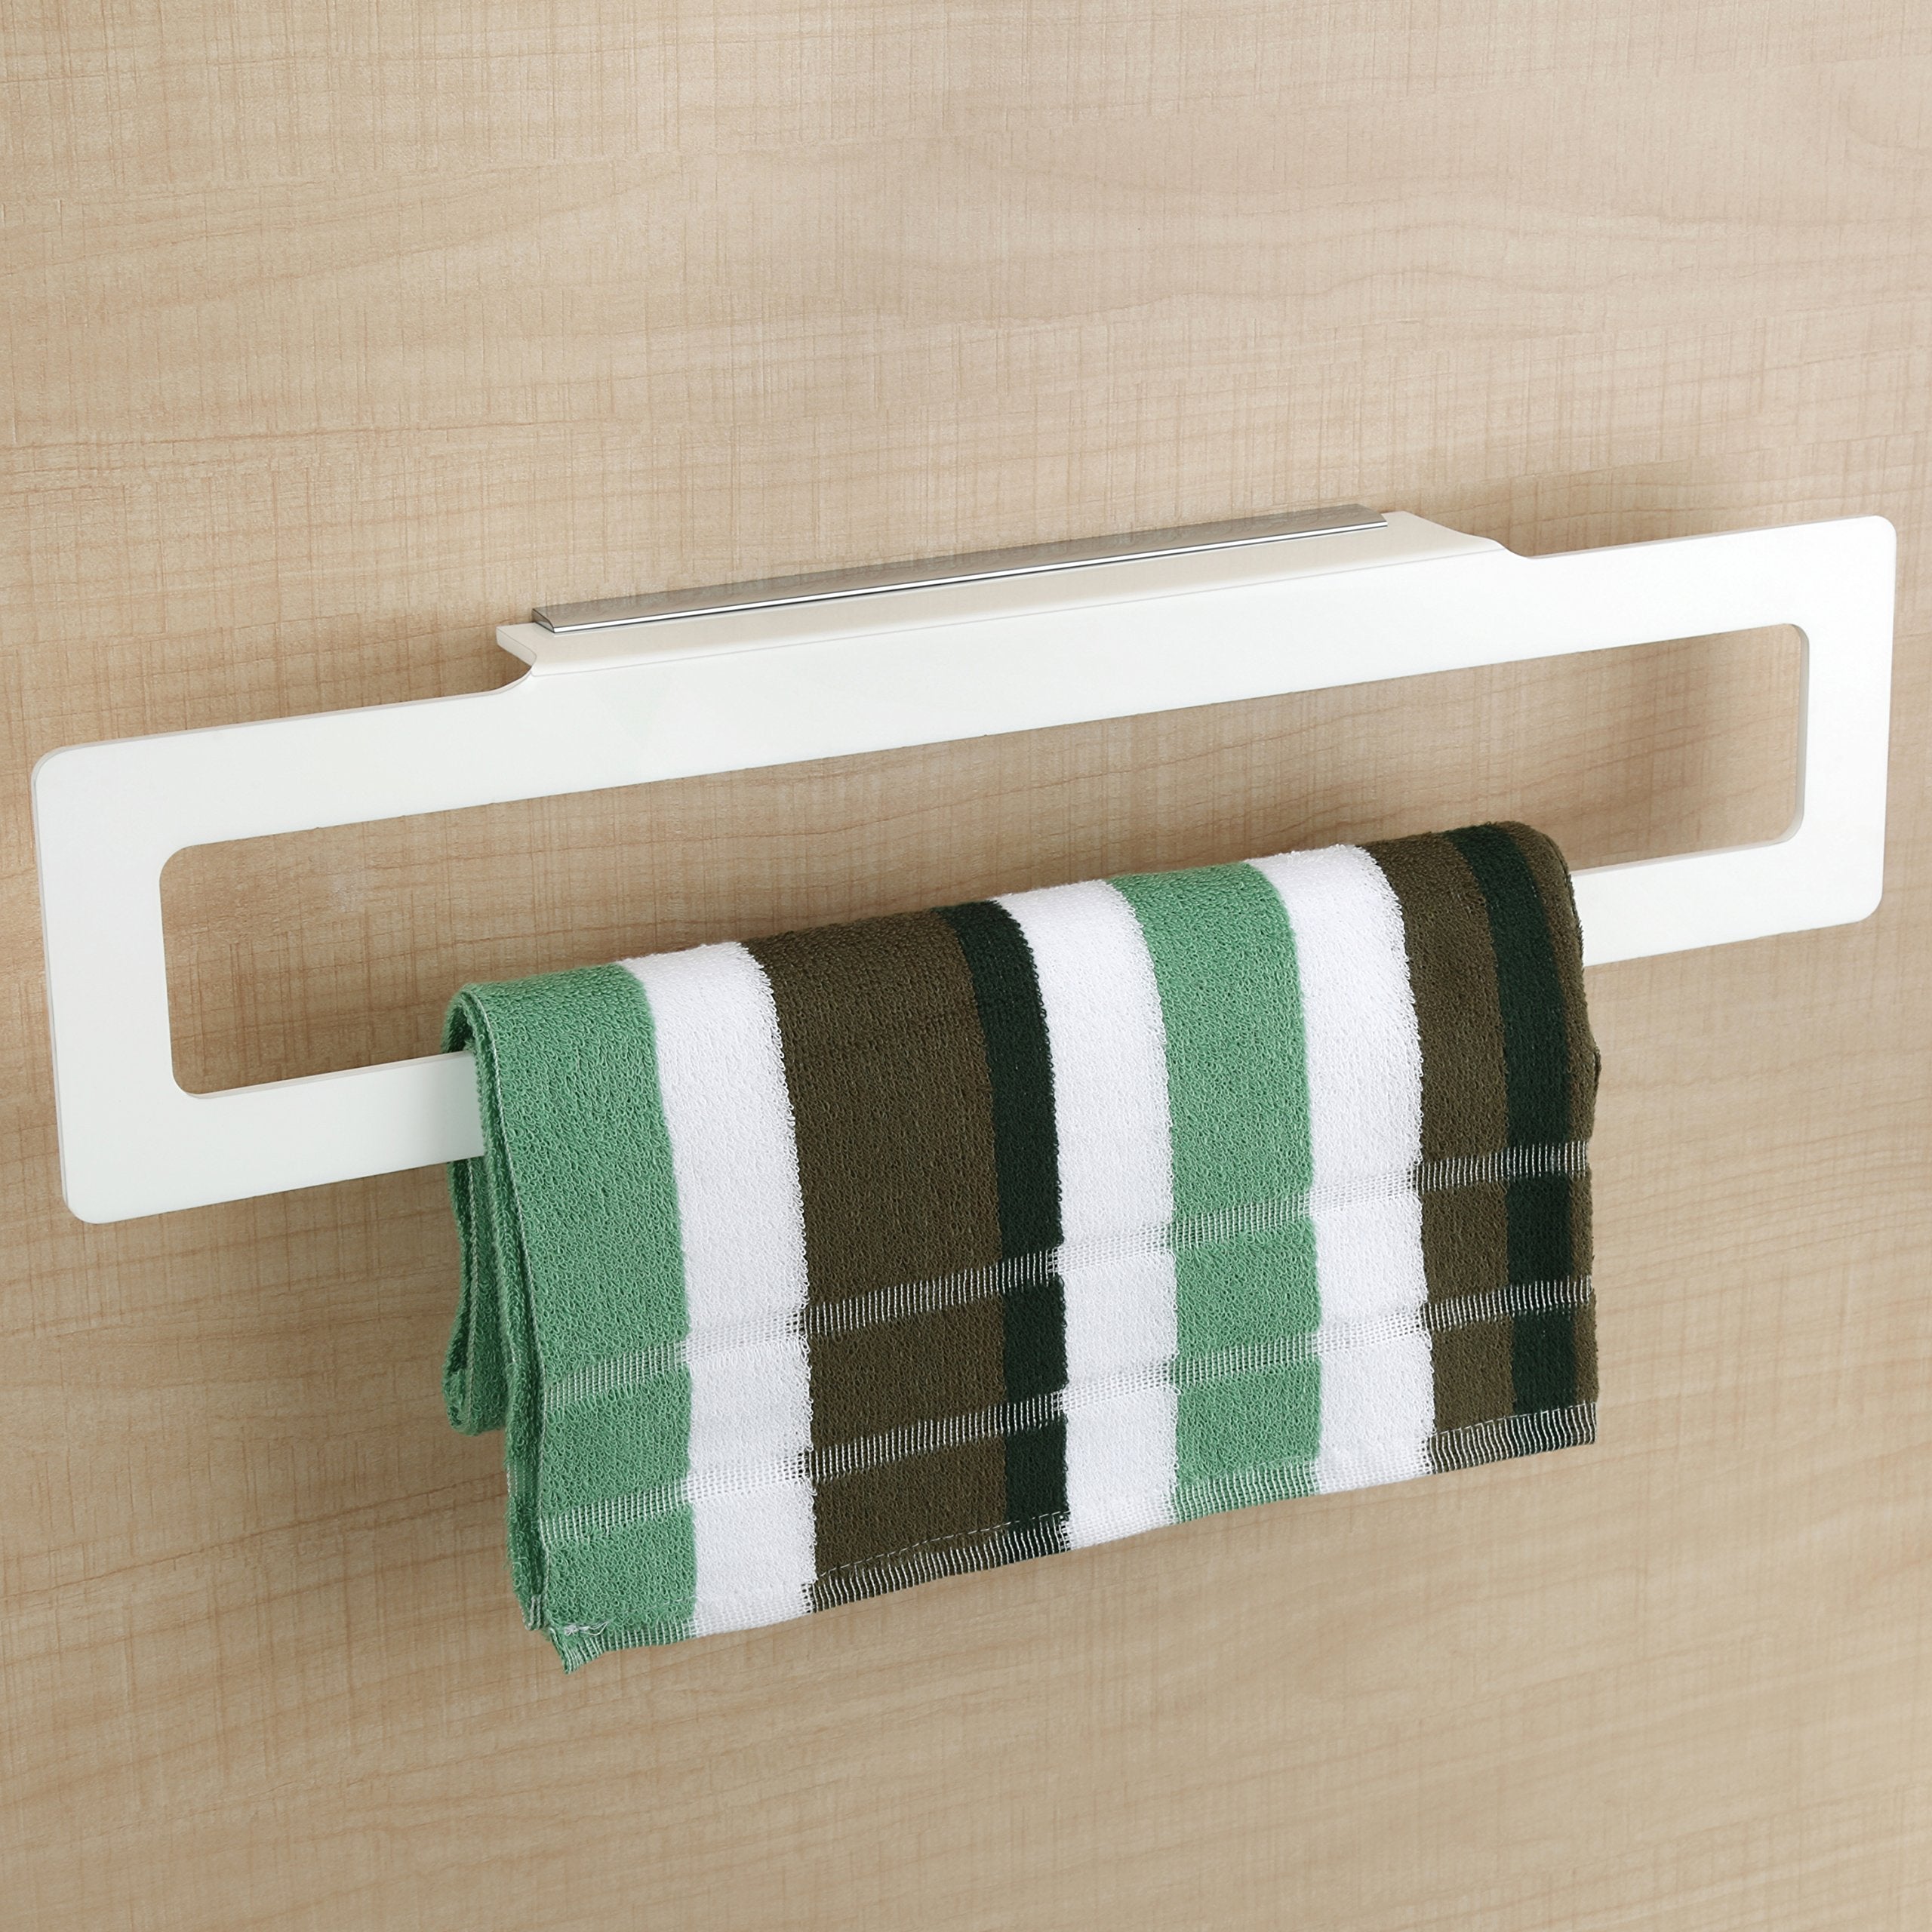 Plantex Acrylic Towel Hanger for Bathroom/Towel Rod-Stand/Bathroom Accessories for Home(18 Inch,Square-White)